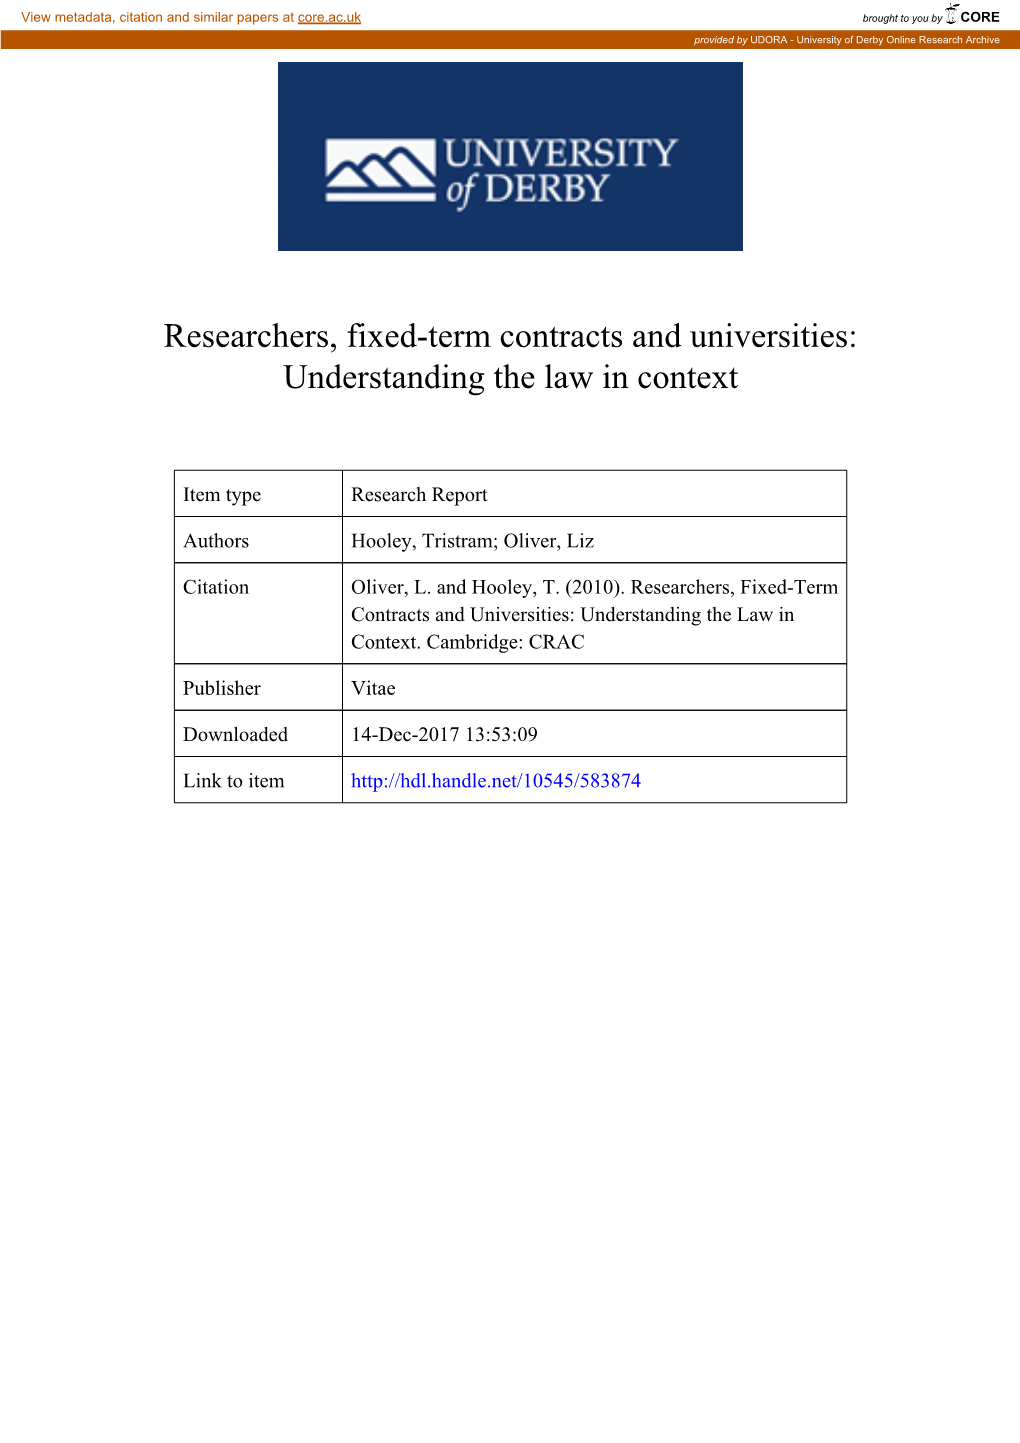 Researchers, Fixed-Term Contracts and Universities: Understanding the Law in Context